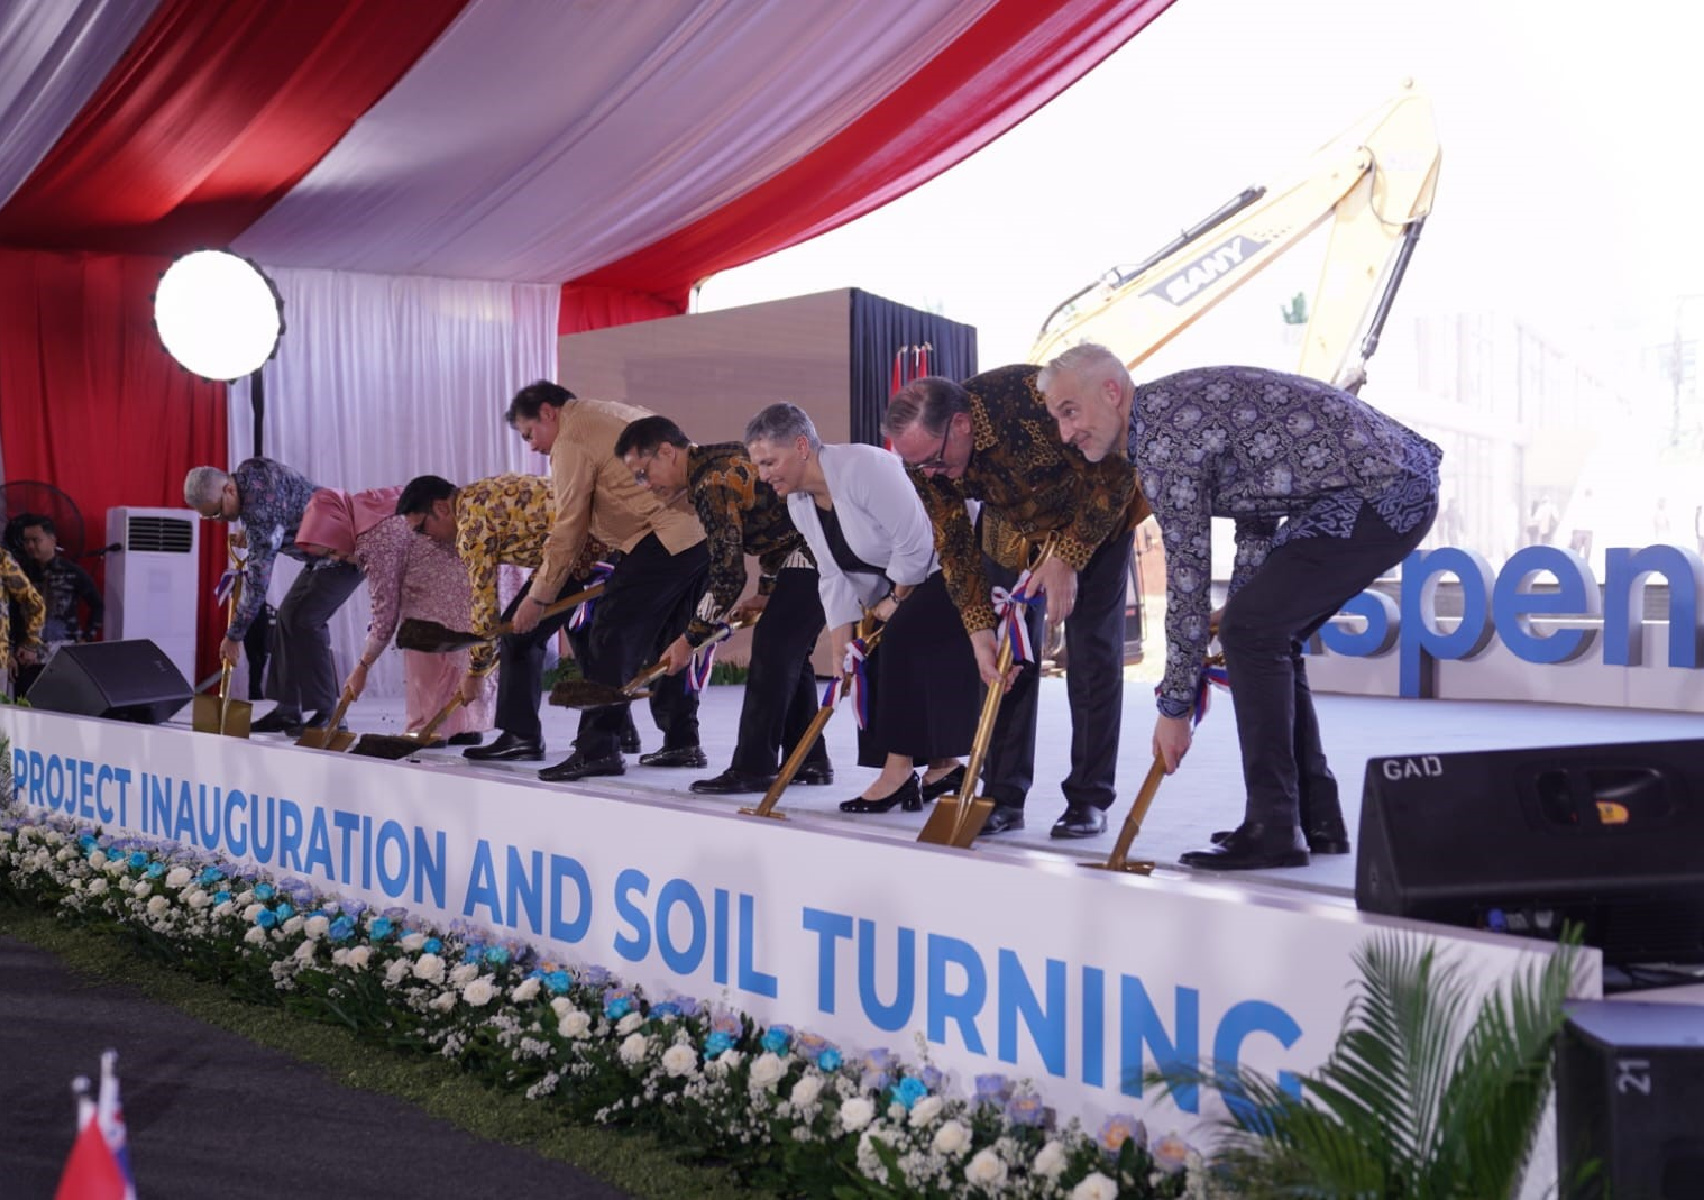 VIPs and dignitaries turning soil at the inauguration ceremony in Depok, West Java.